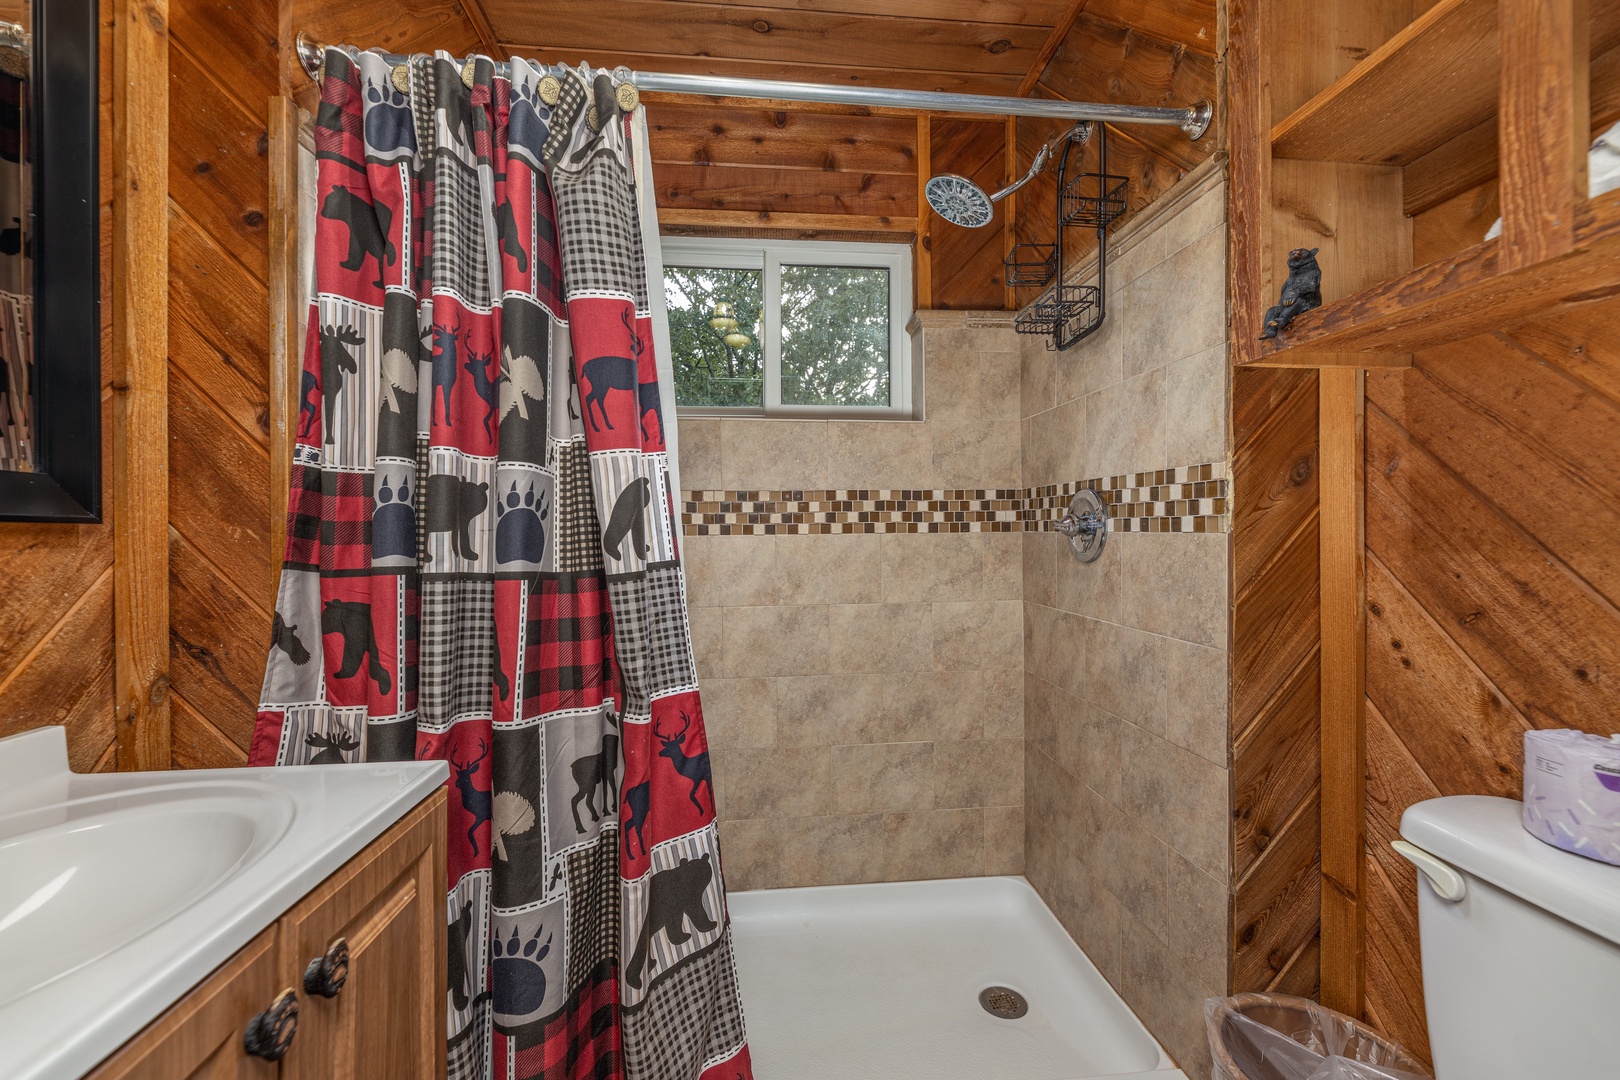 Bathroom with a walk in shower at Bearing Views, a 3 bedroom cabin rental located in Pigeon Forge